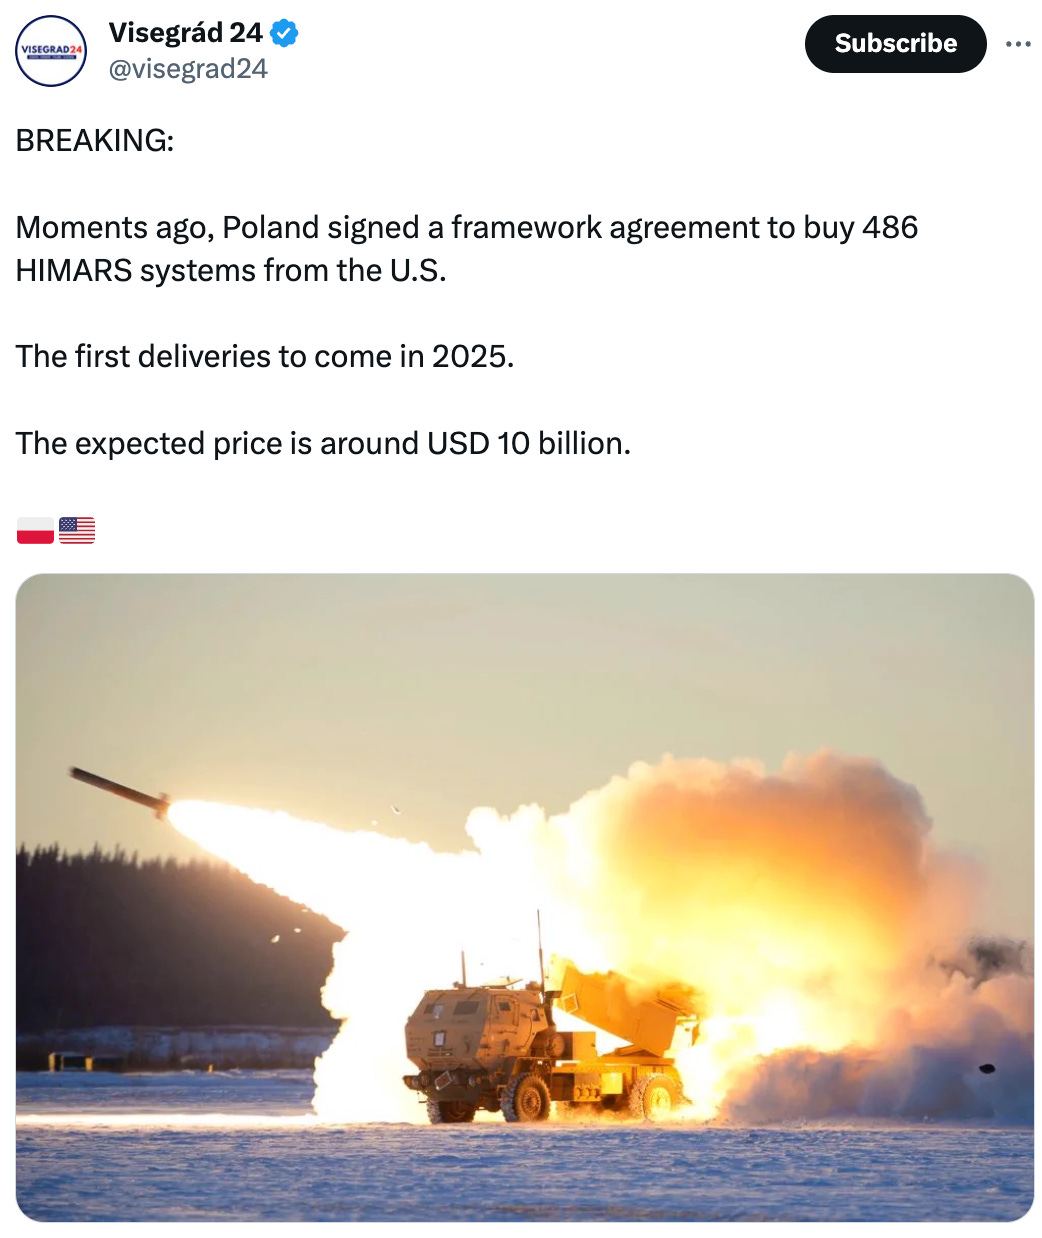  Visegrád 24 @visegrad24 BREAKING:  Moments ago, Poland signed a framework agreement to buy 486 HIMARS systems from the U.S.  The first deliveries to come in 2025.  The expected price is around USD 10 billion.  🇵🇱🇺🇸